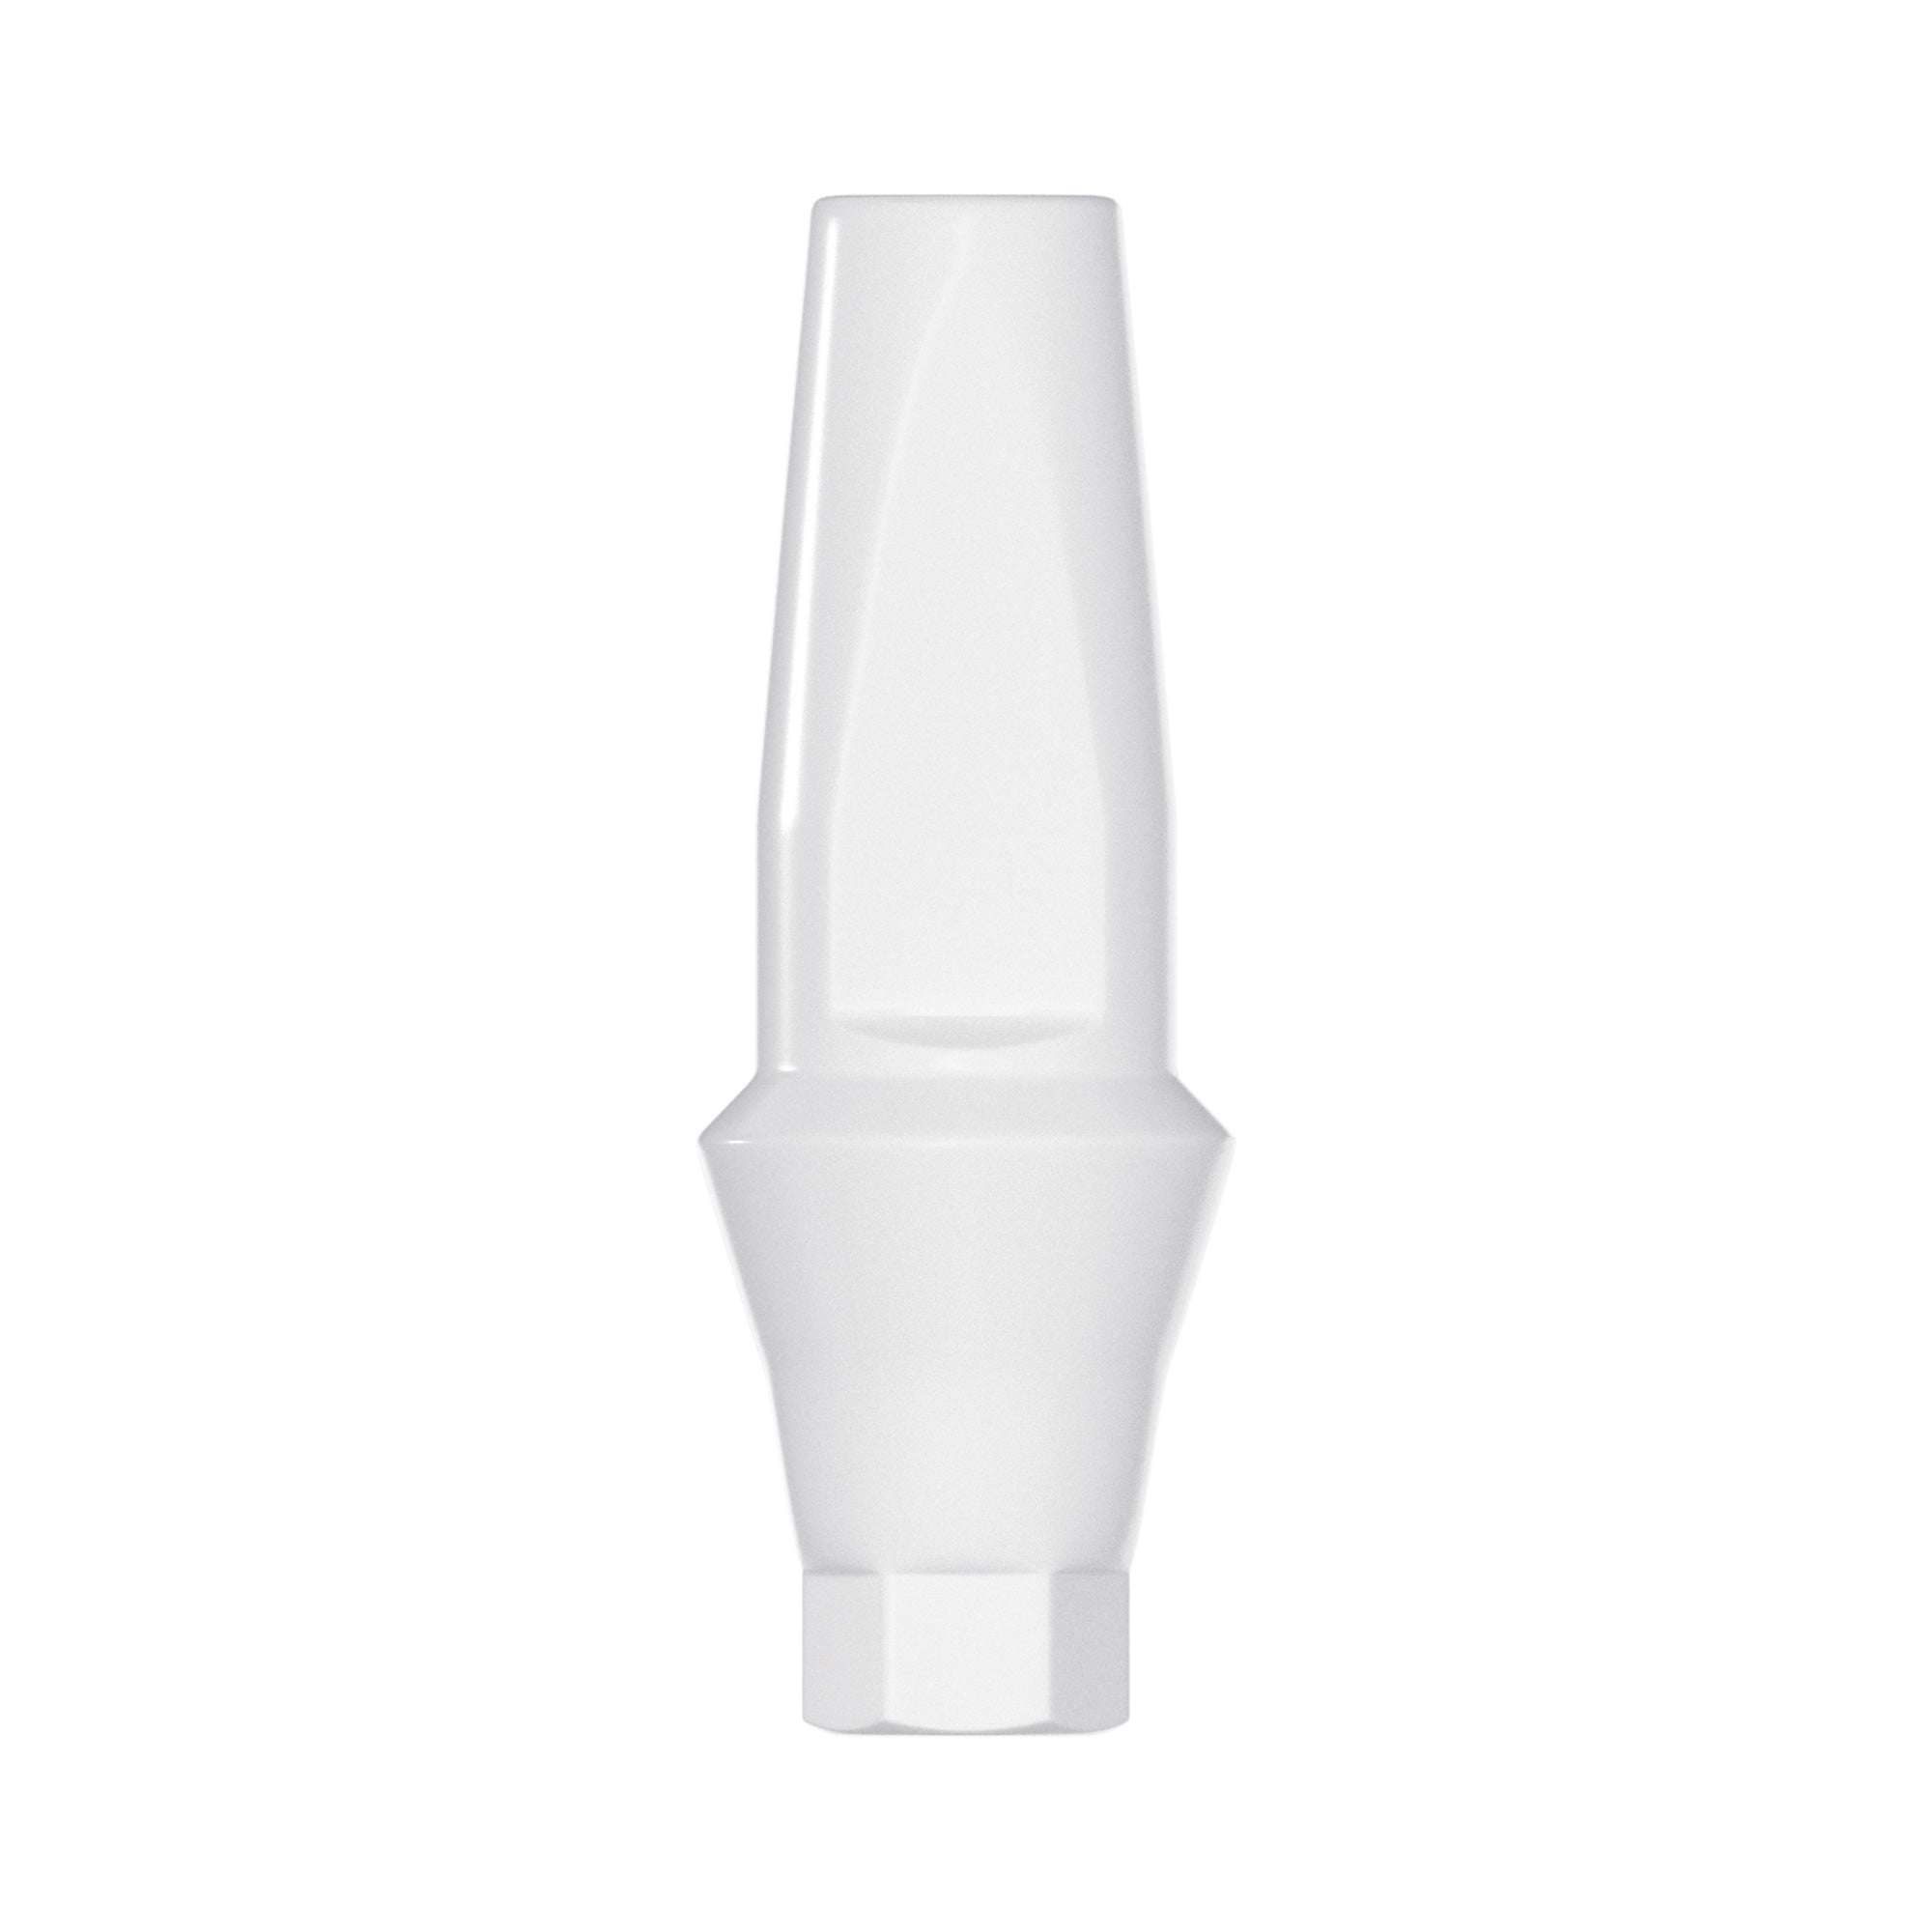 DSI Temporary Straight PEEK Abutment 4.75mm- Conical Connection RP Ø4.3-5.0mm